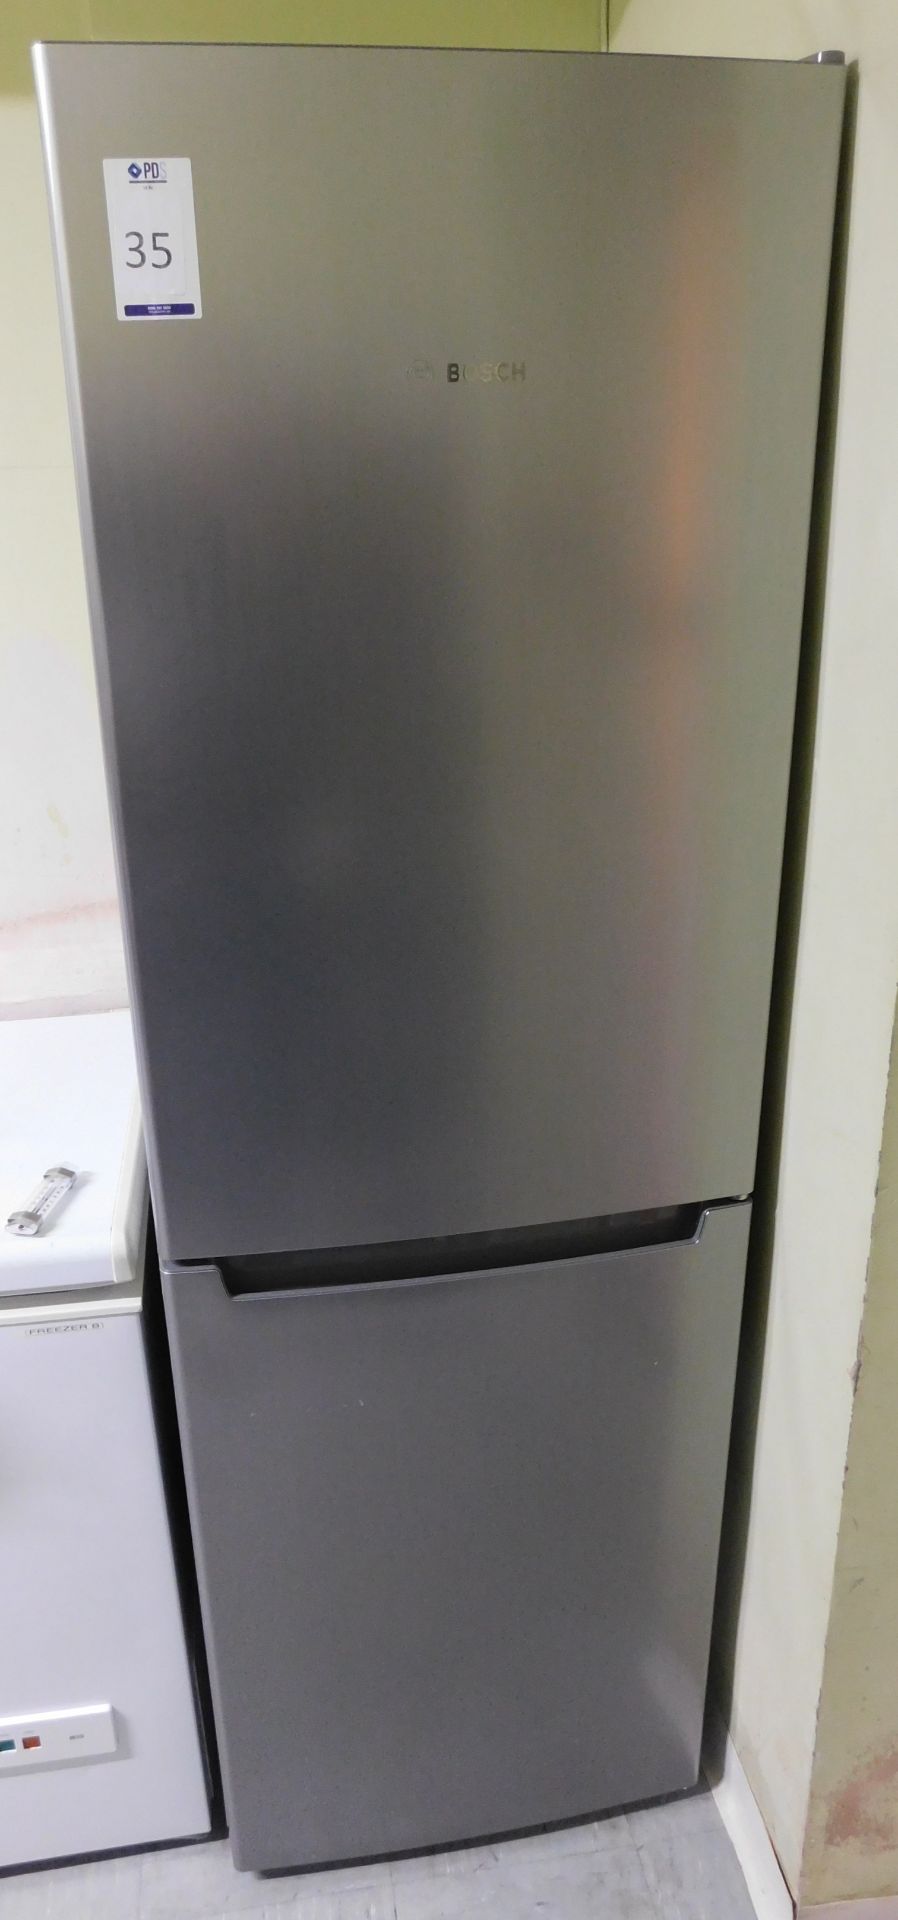 Bosch Upright Domestic Fridge Freezer (Location Bloomsbury - See General Notes for More Details)